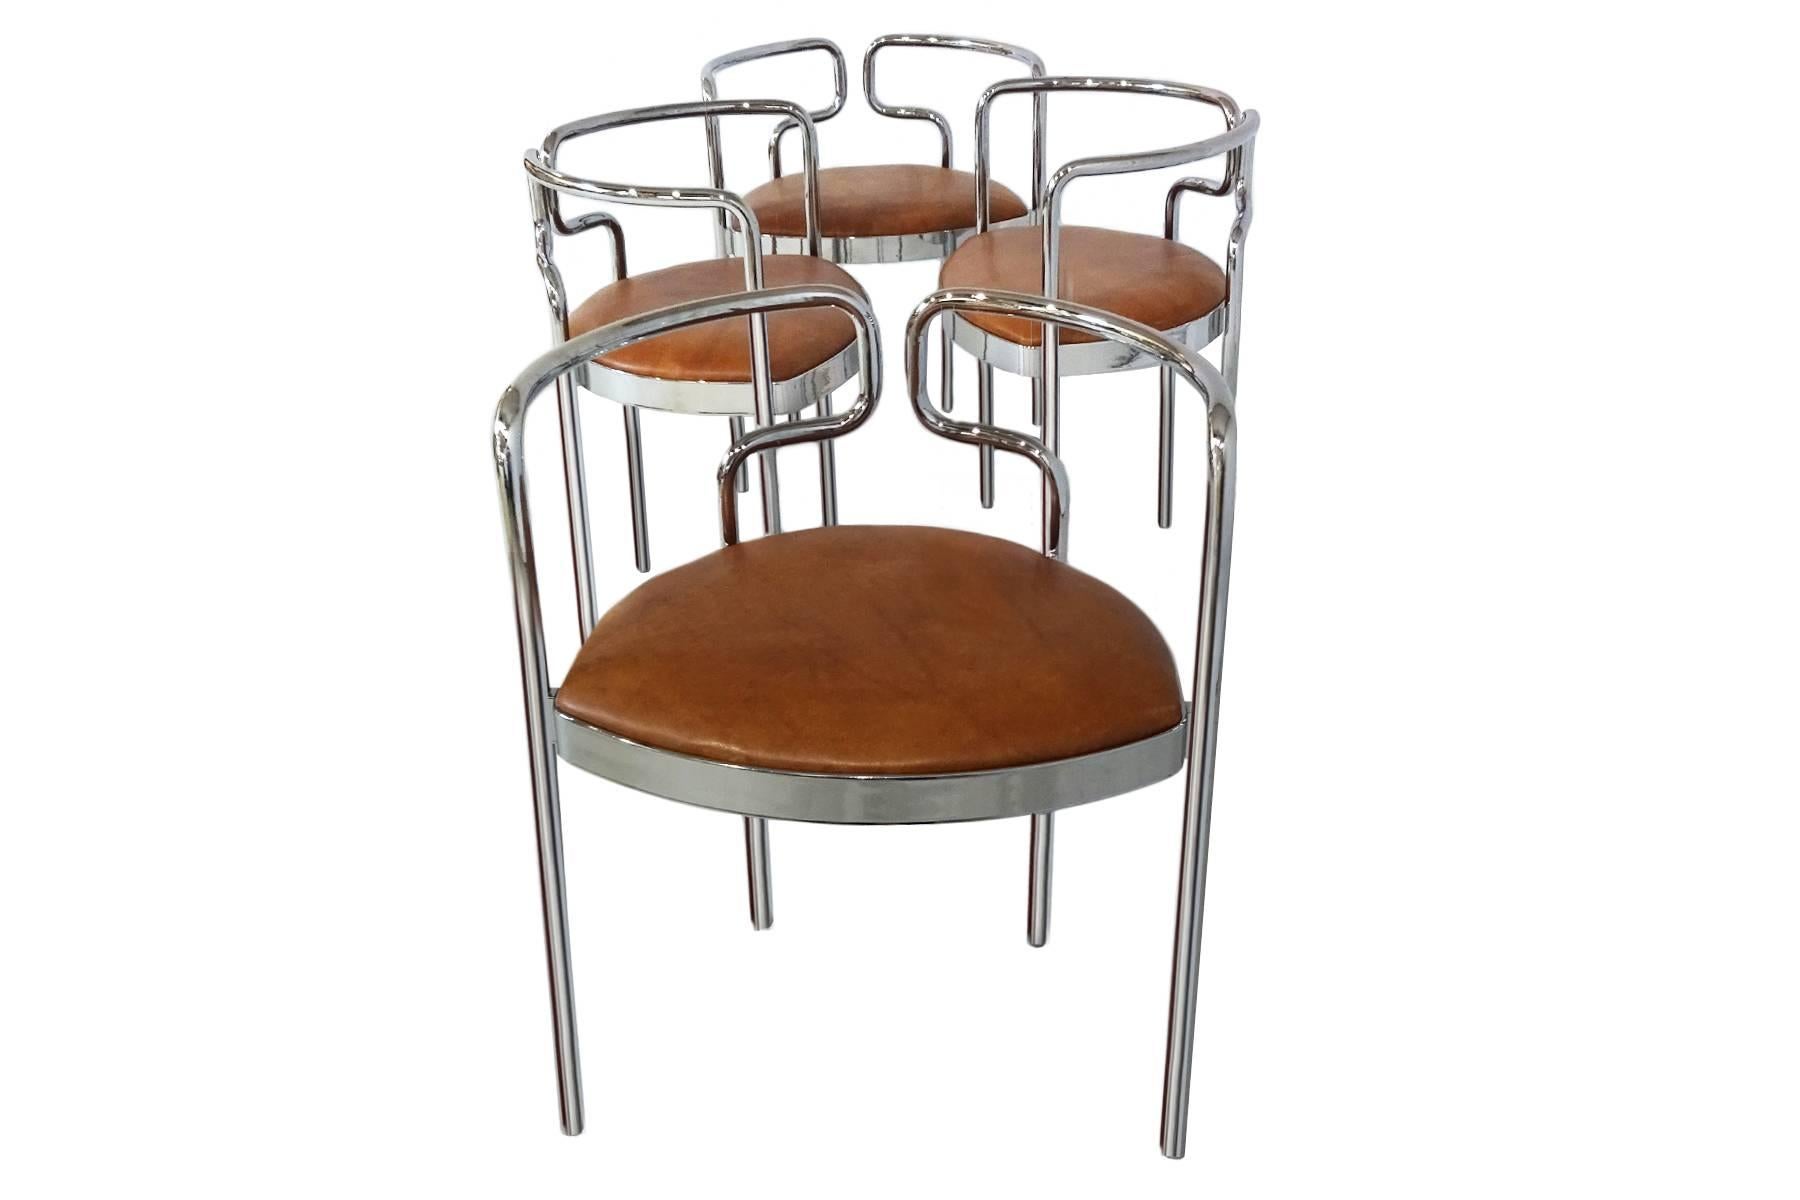 A set of four rare dining or armchairs, model 9230, by Danish architect and designer Henning Larsen. Originally designed by Larsen in the late 1960s for the Kar Cafe in Copenhagen in 1967 they are constructed of bent chrome-plated steel, ply wood